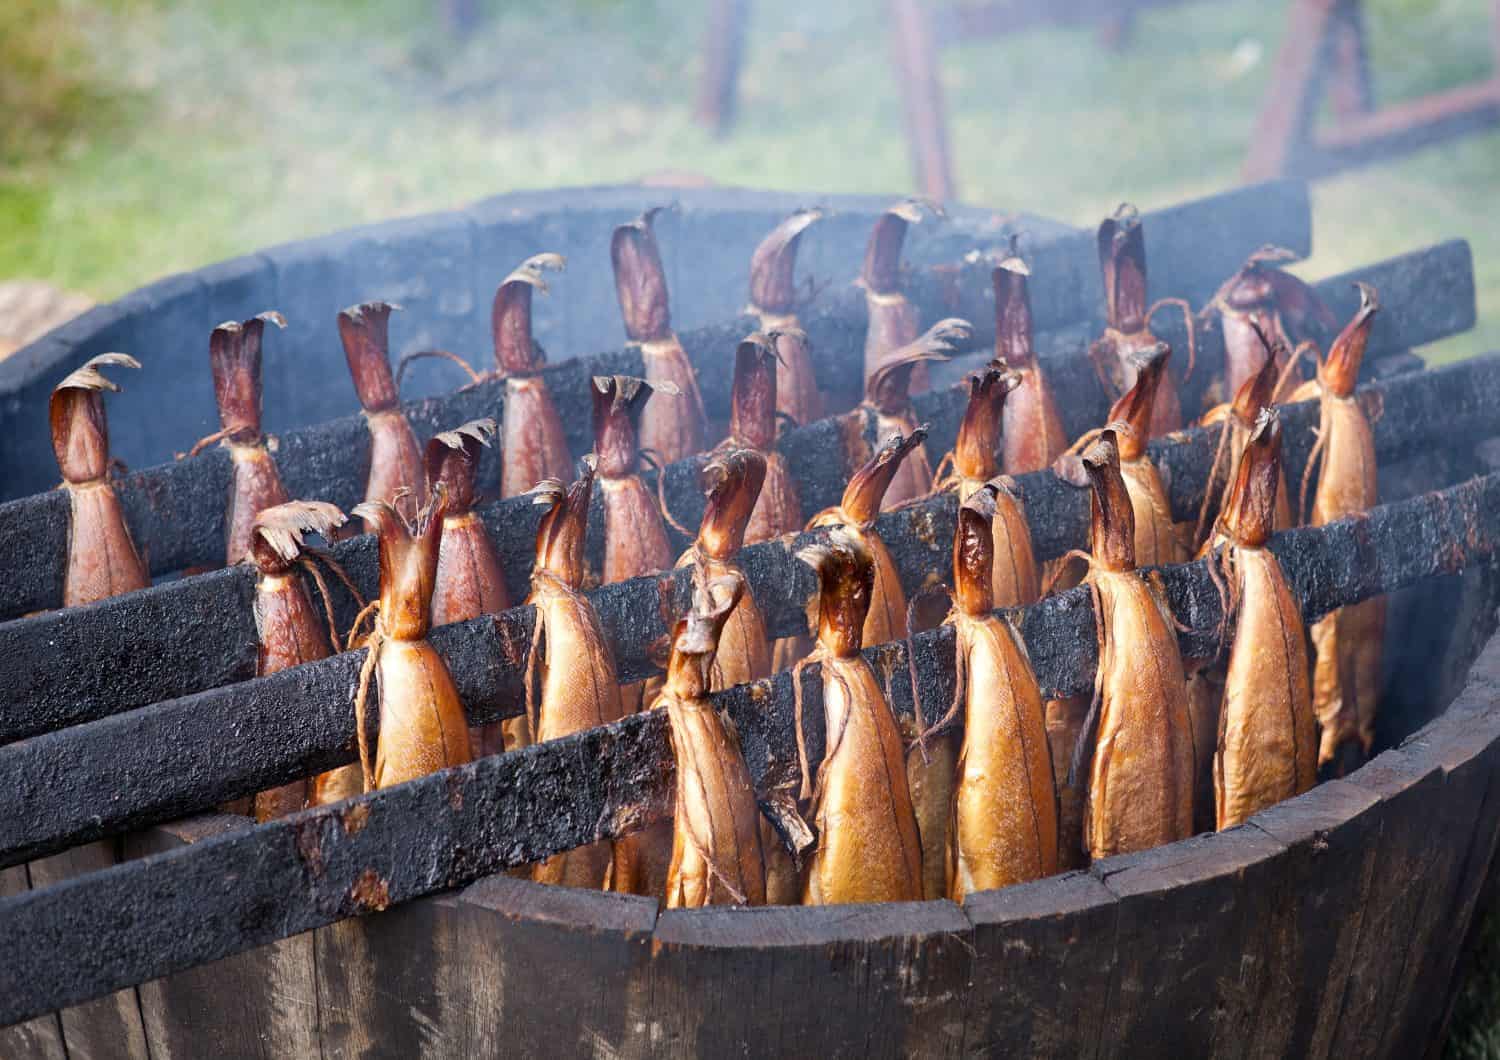 Traditional Scottish smoked fish cooking in wooden barrel